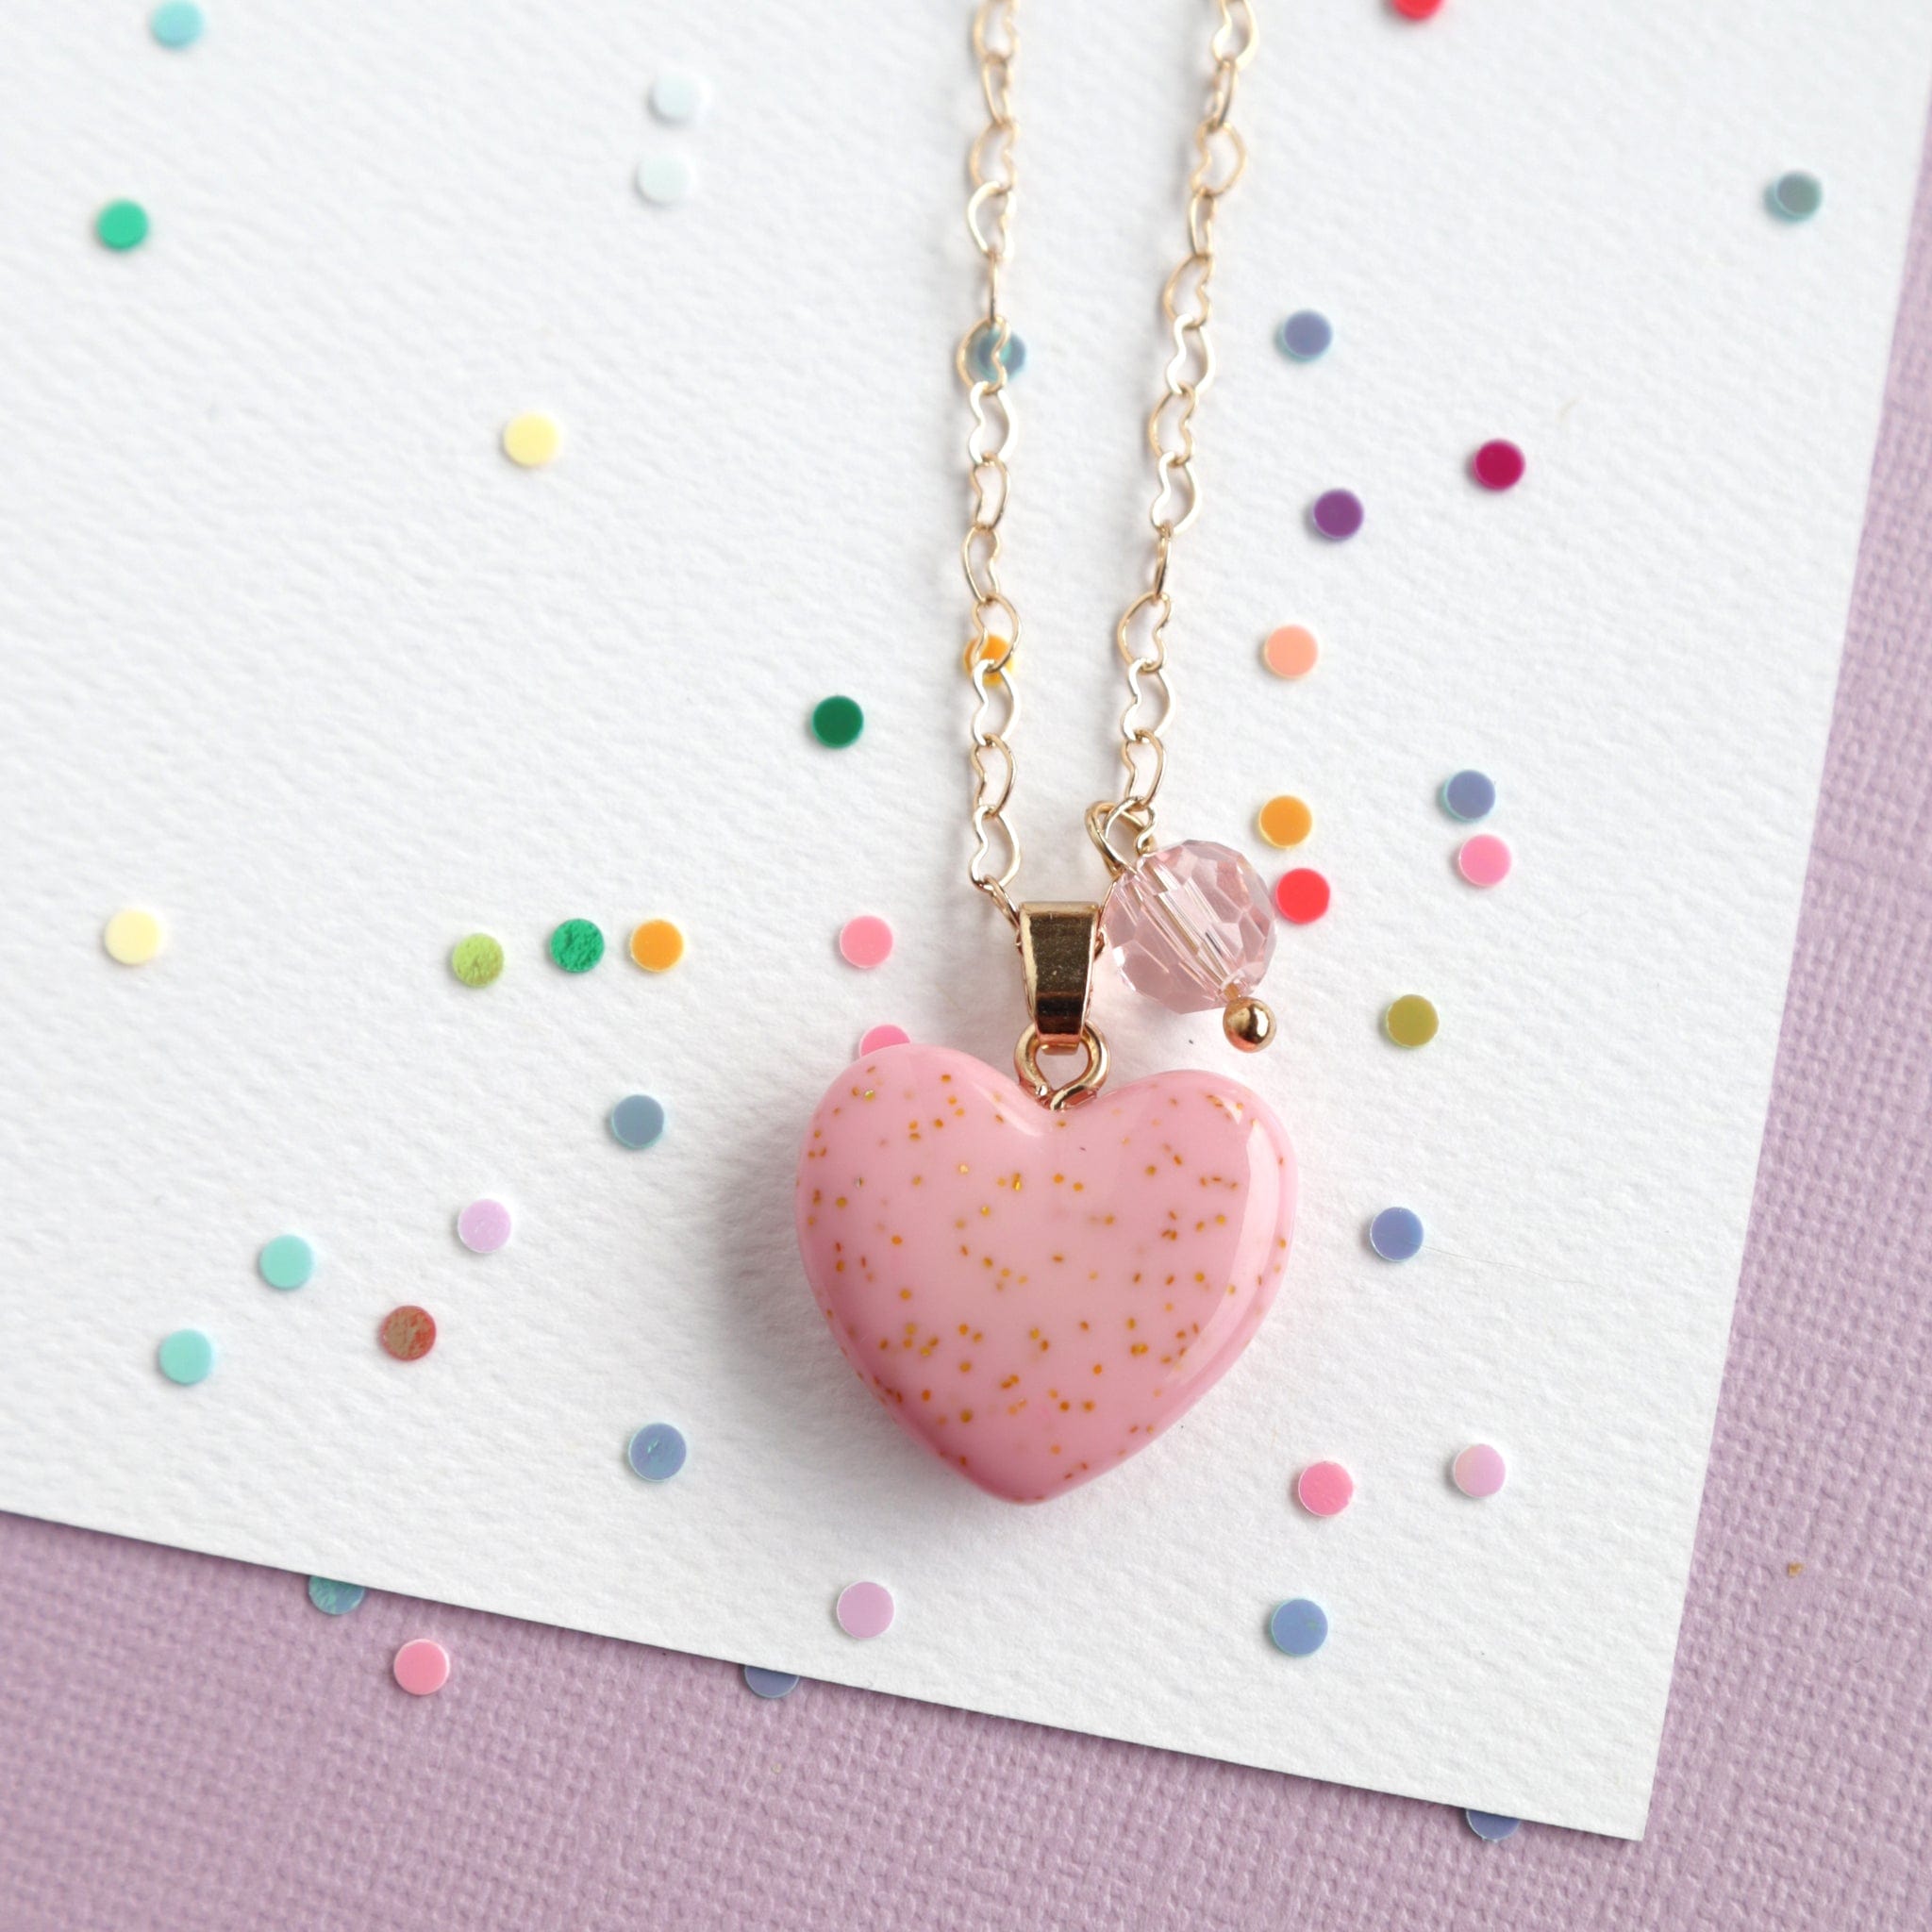 Mon Coco Girls Accessory Sweet Heart Necklace